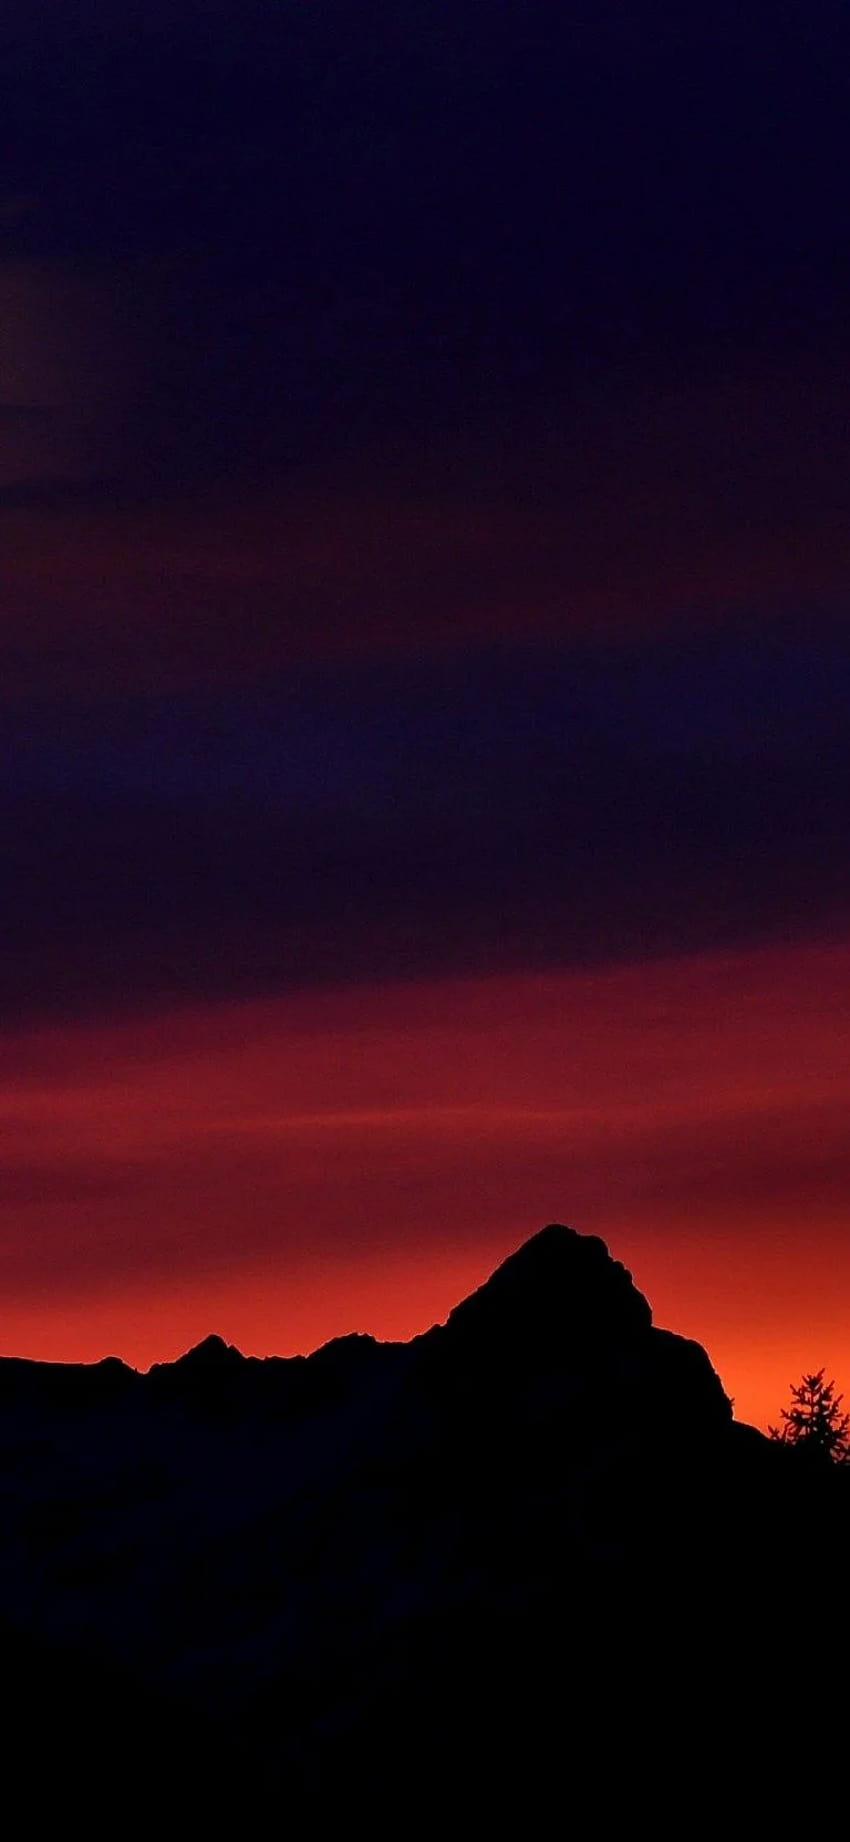 Afterglow Black and Red Amoled Sunset Android ⋆ Traxzee, sunset amoled HD phone wallpaper